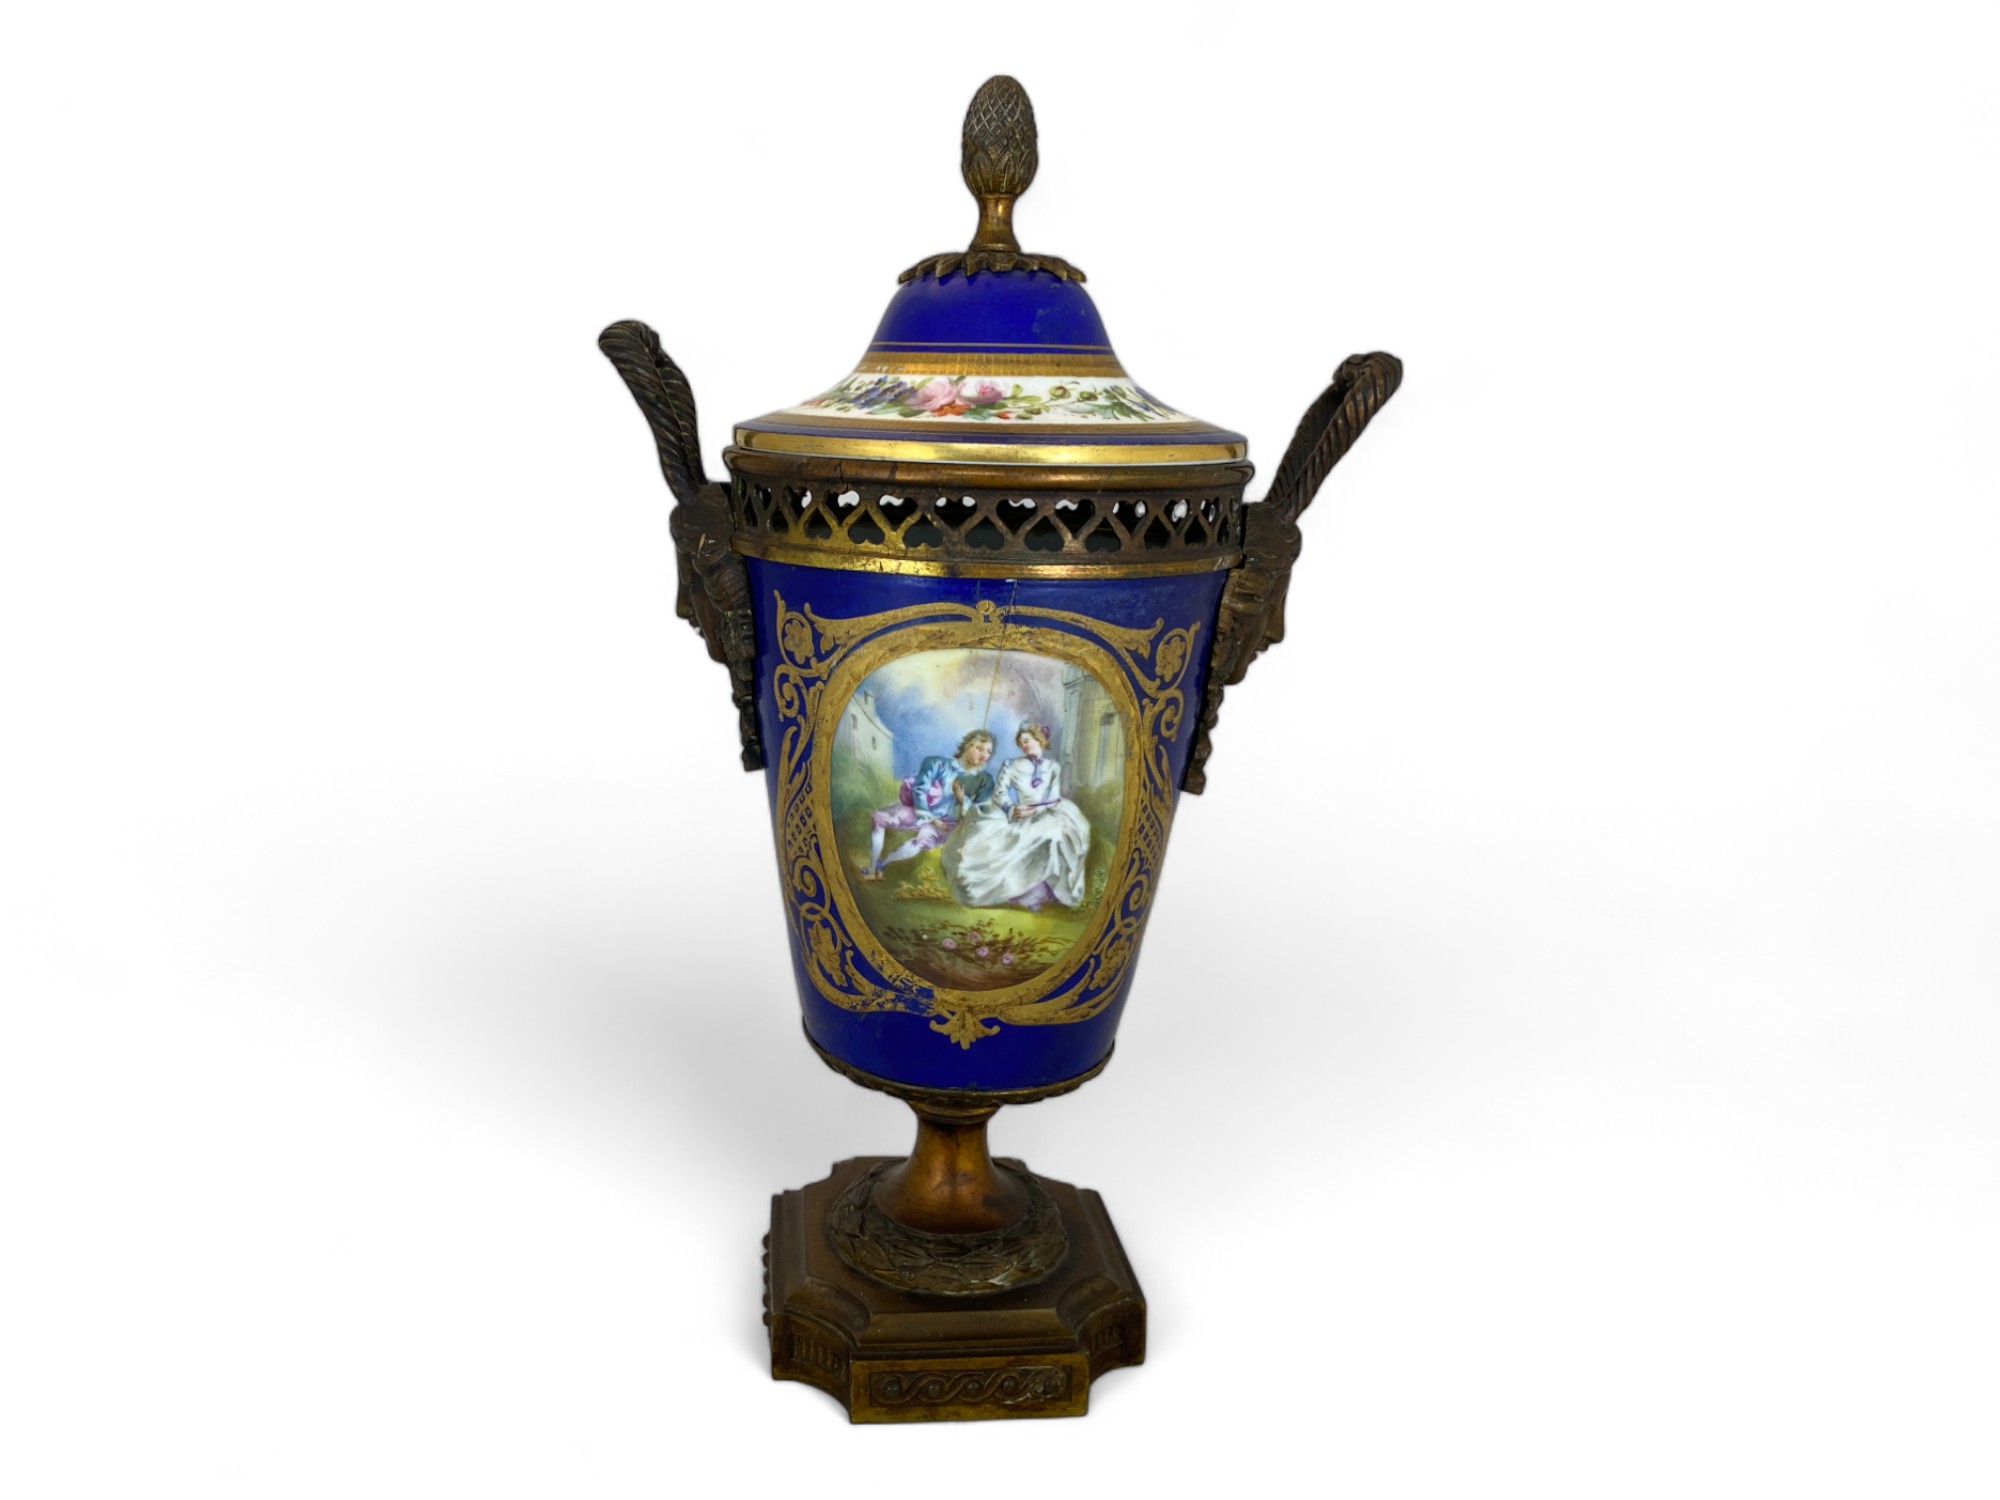 A 19th century Sèvres style porcelain and gilt bronze mounted beau bleu cup and cover